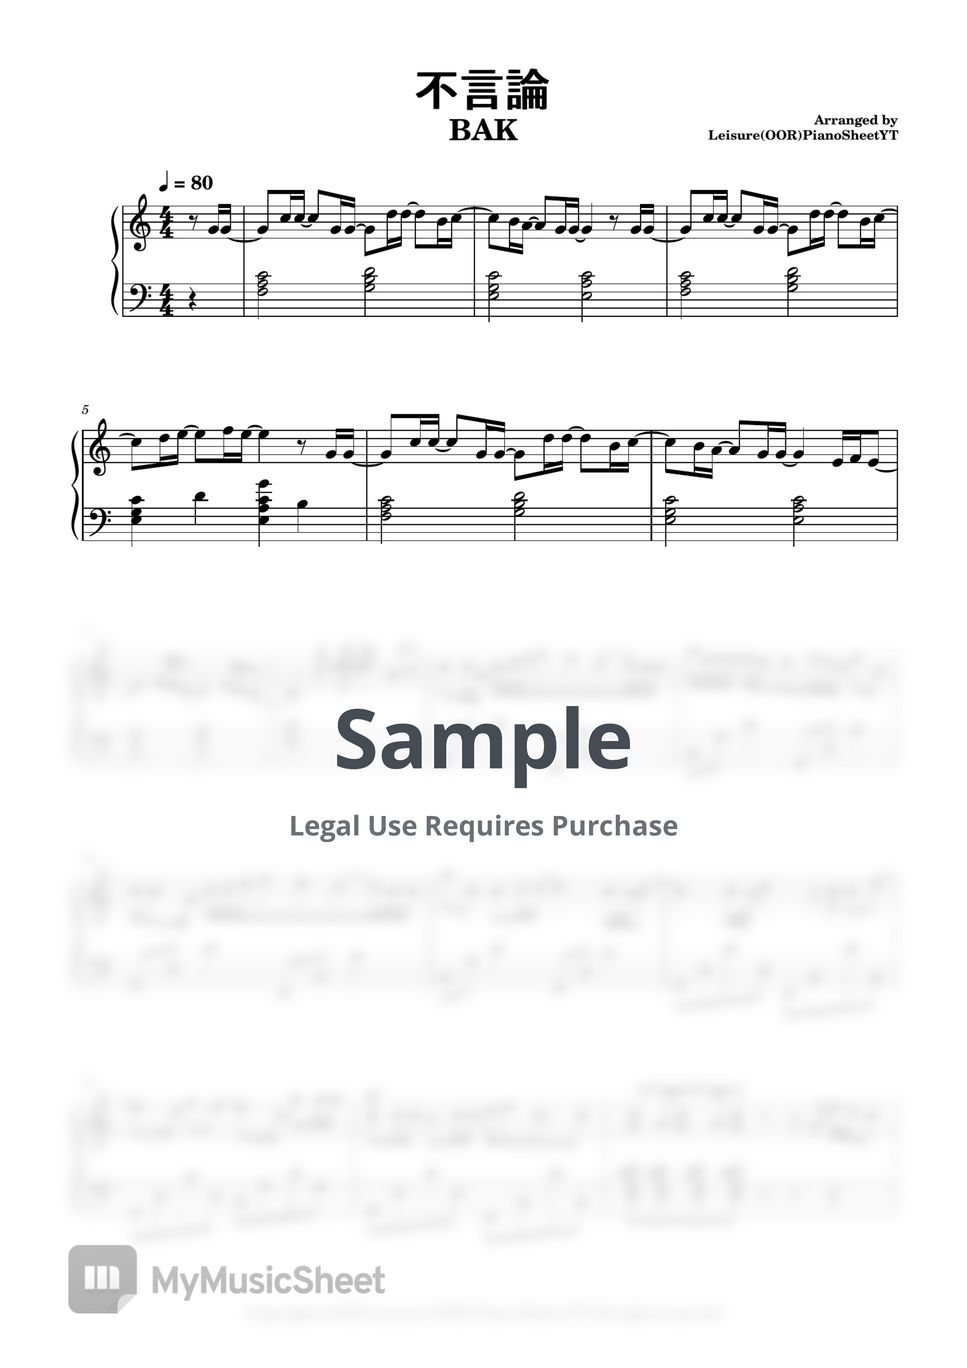 BAK - 不言論 by Leisure (OOR) Piano Sheets YT